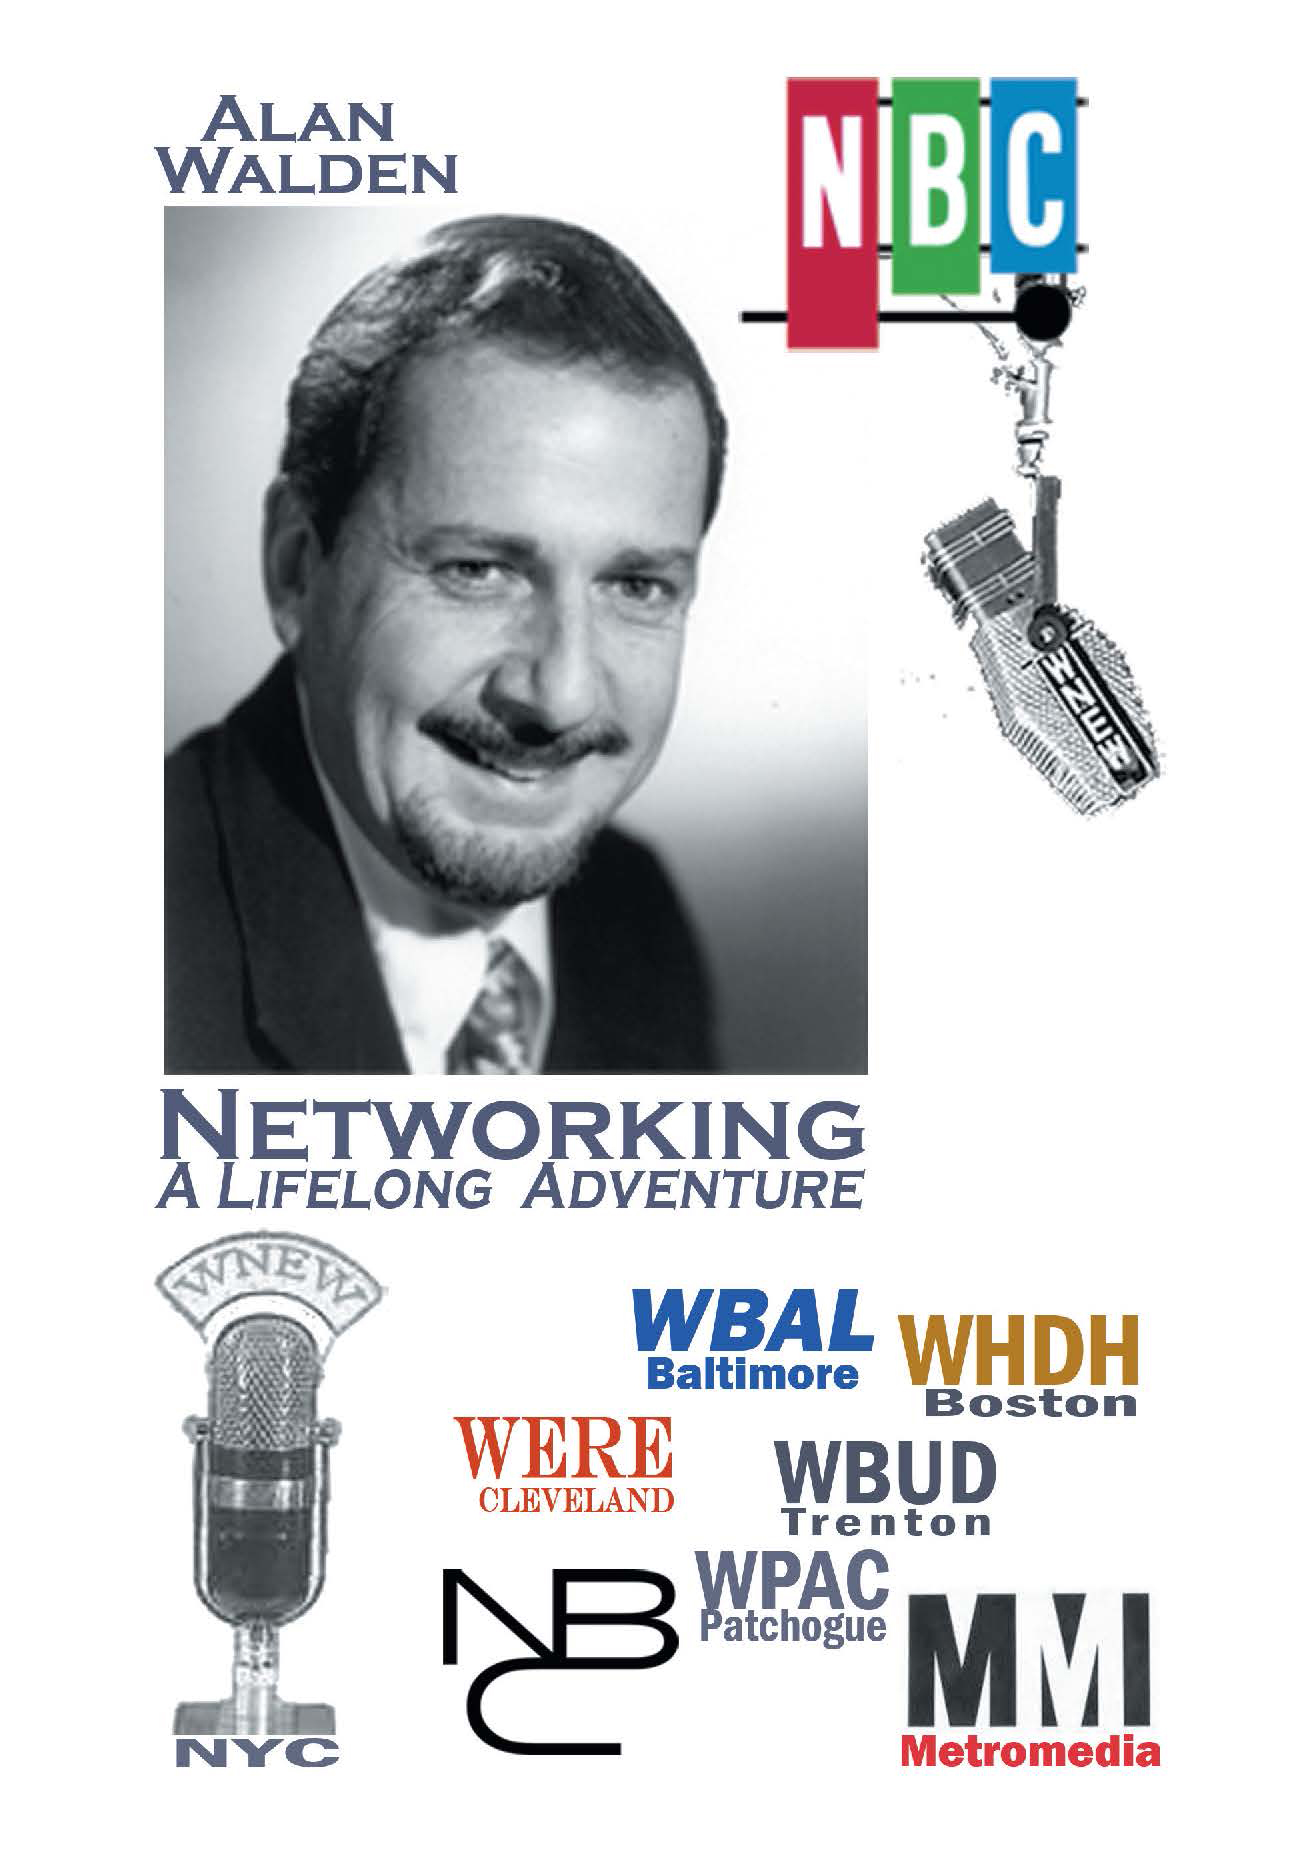 Alan Walden’s New Book, "Networking: A Lifelong Adventure," is an Enthralling Account of the Author's Life & Career in Broadcast Journalism & His Pursuit of Excellence